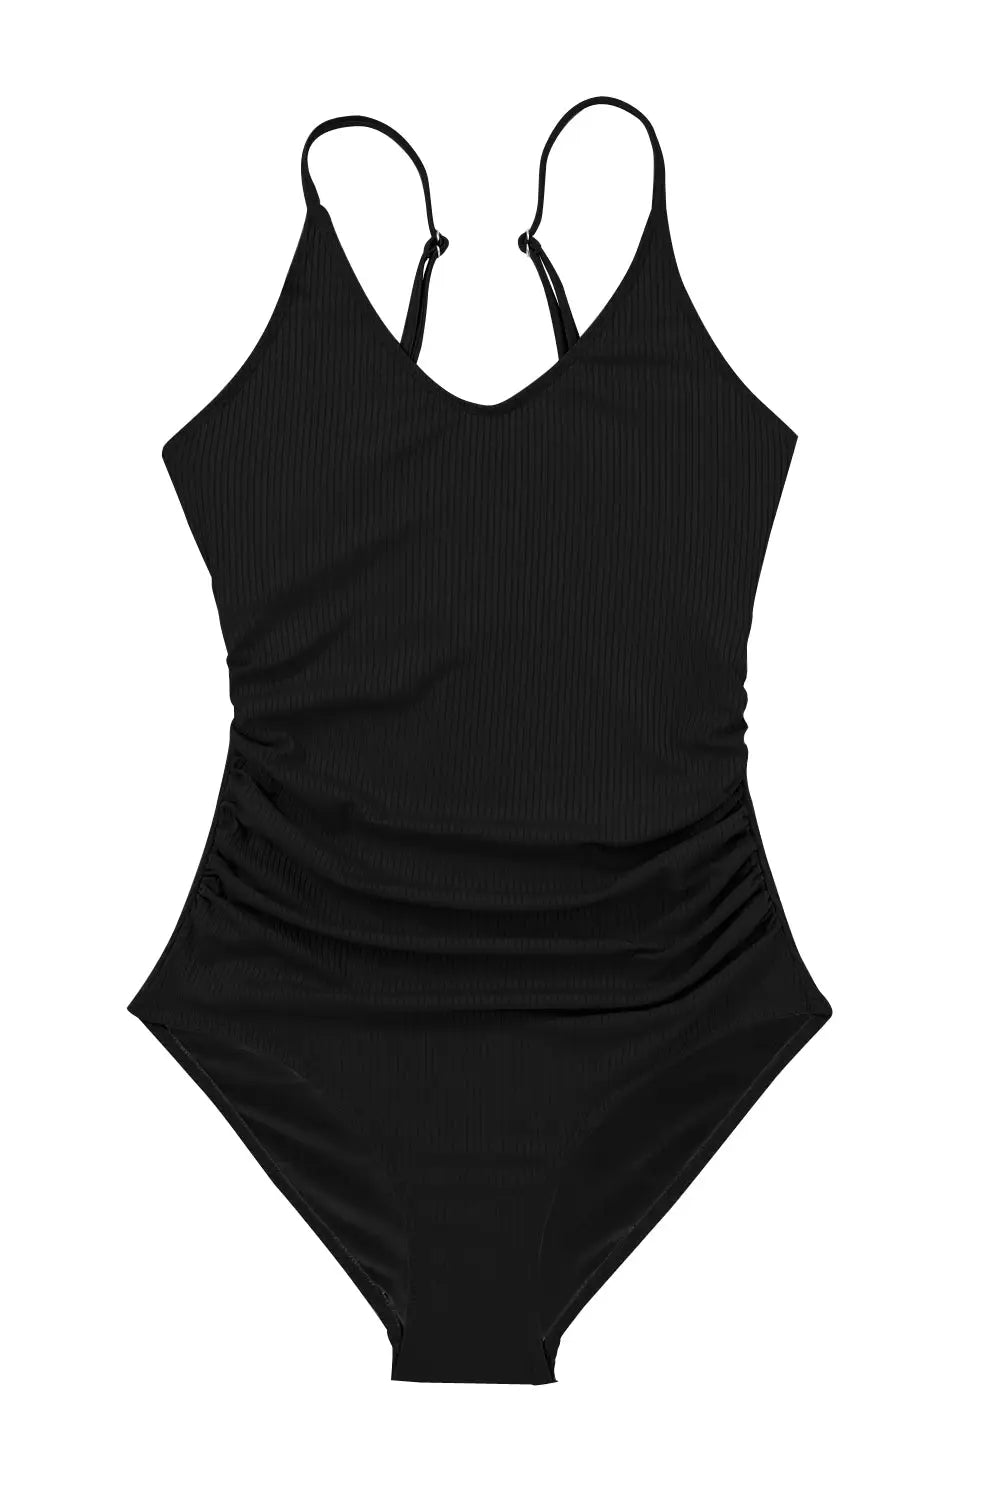 Black ribbed one piece swimsuit - swimsuits